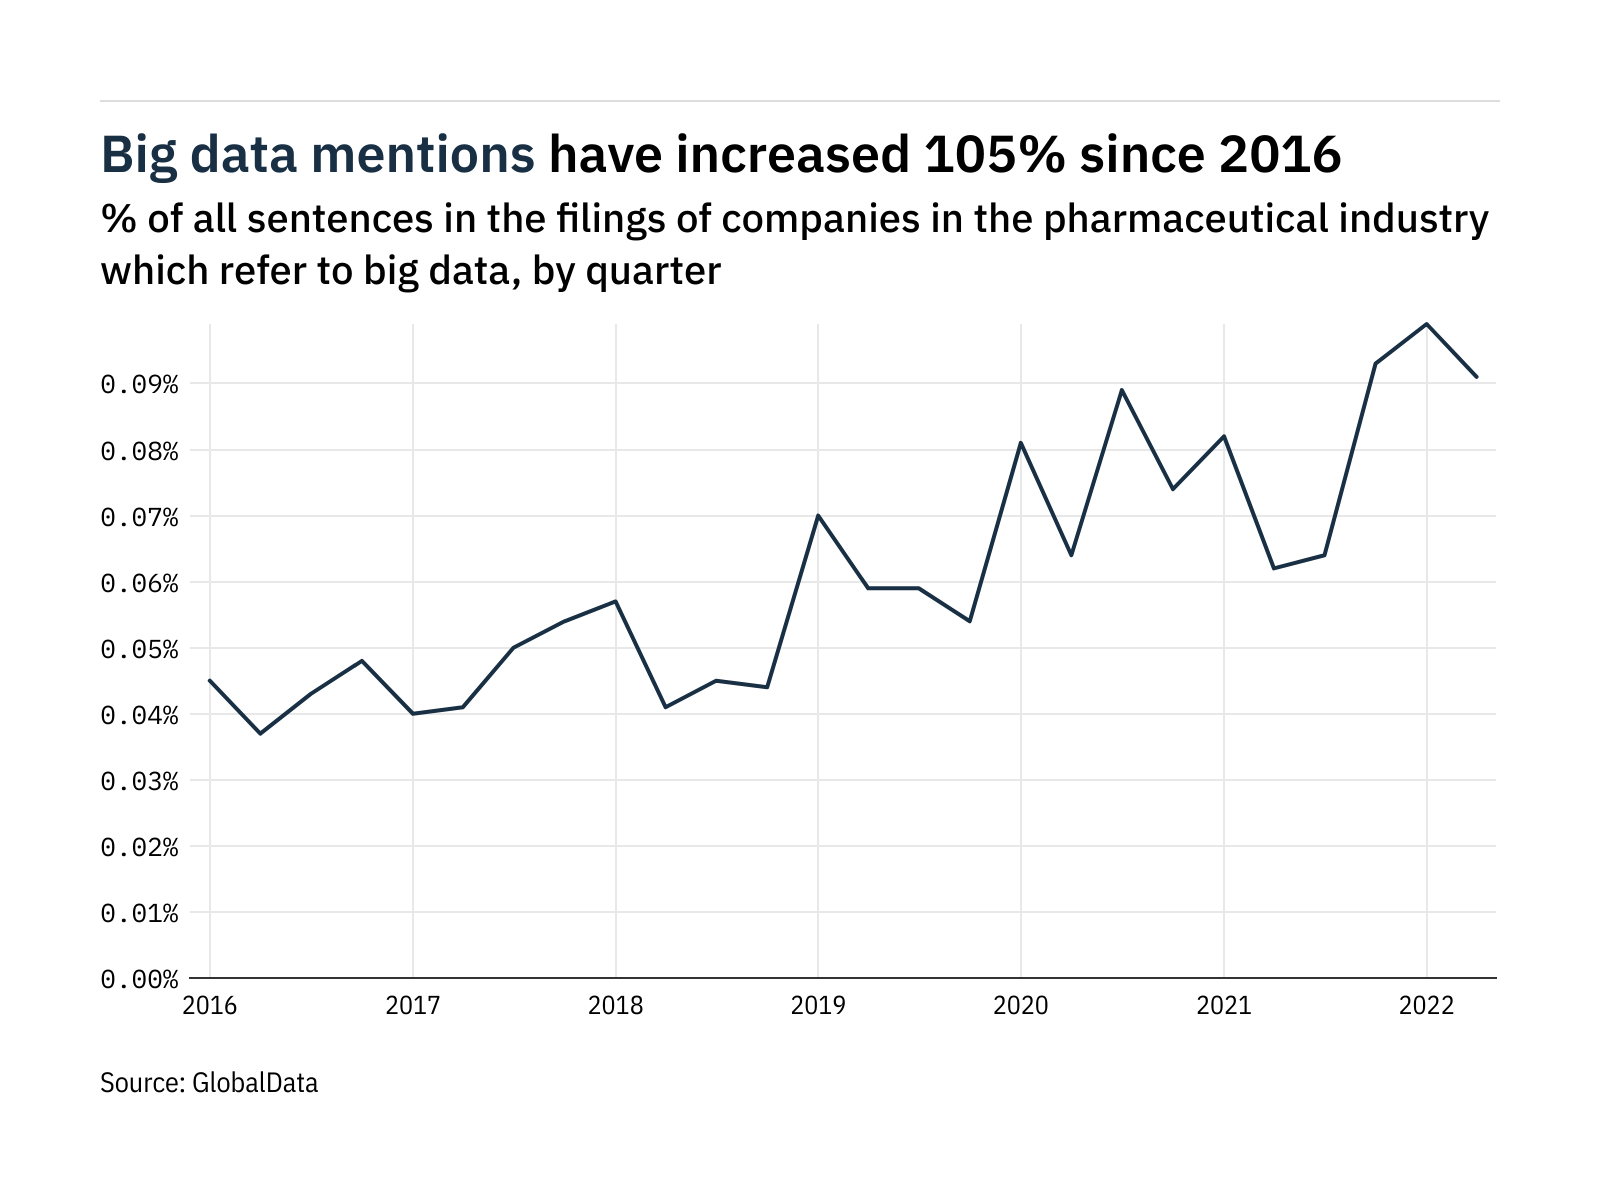 Filings buzz in pharmaceuticals: 47% increase in big data mentions since Q2 of 2021